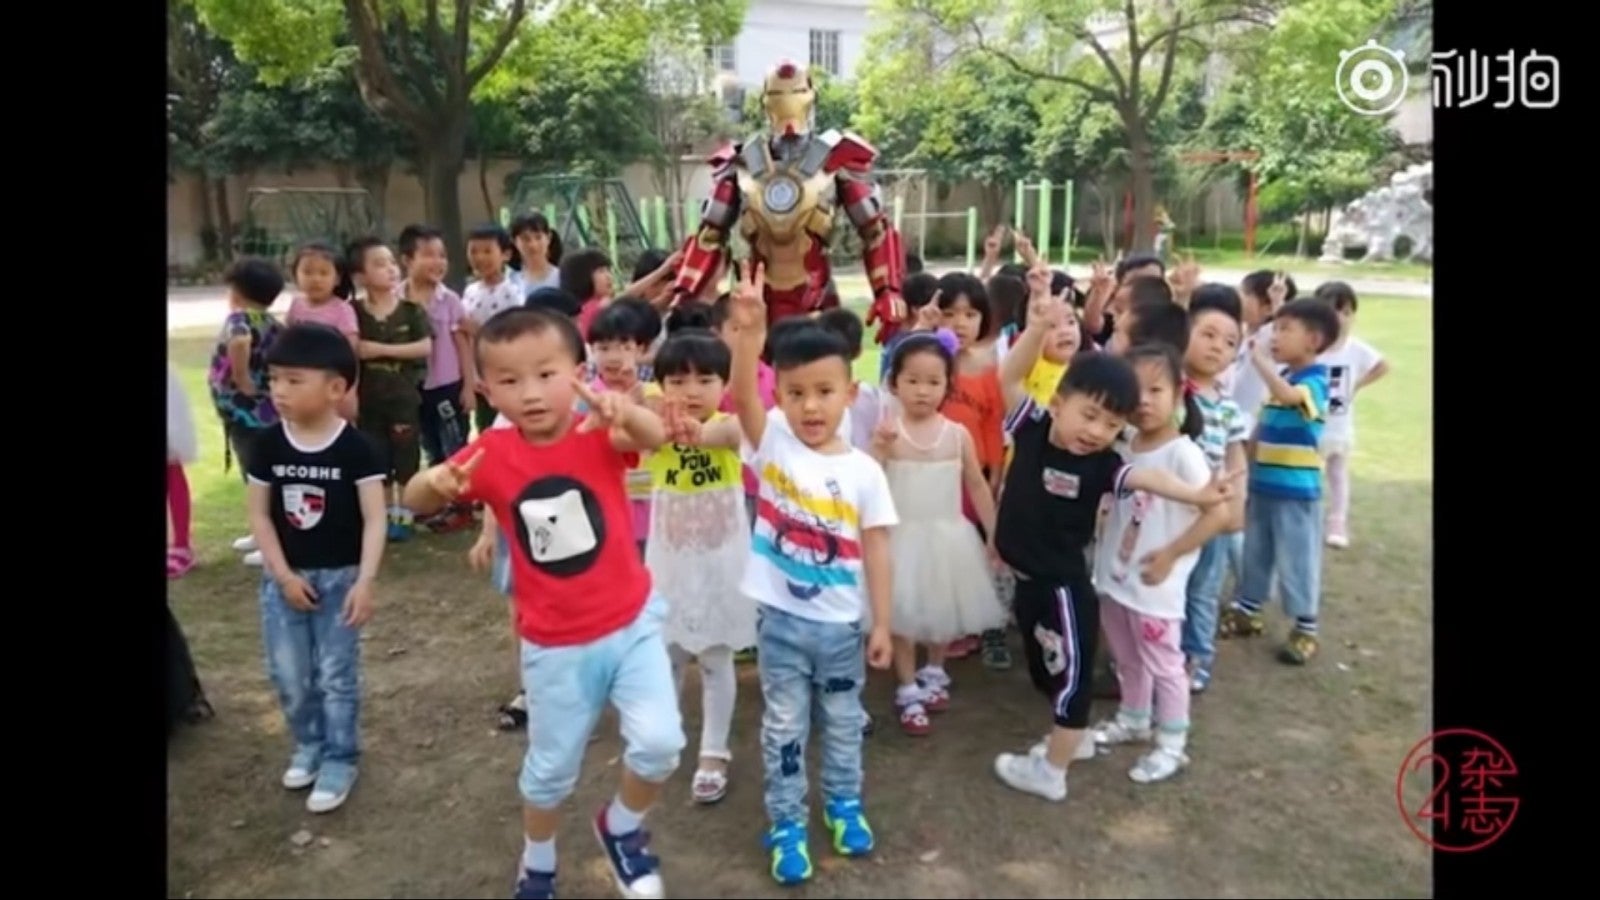 Devoted Father Visits Daughter's School in Iron Man Suit; Stops All Classes - WORLD OF BUZZ 1